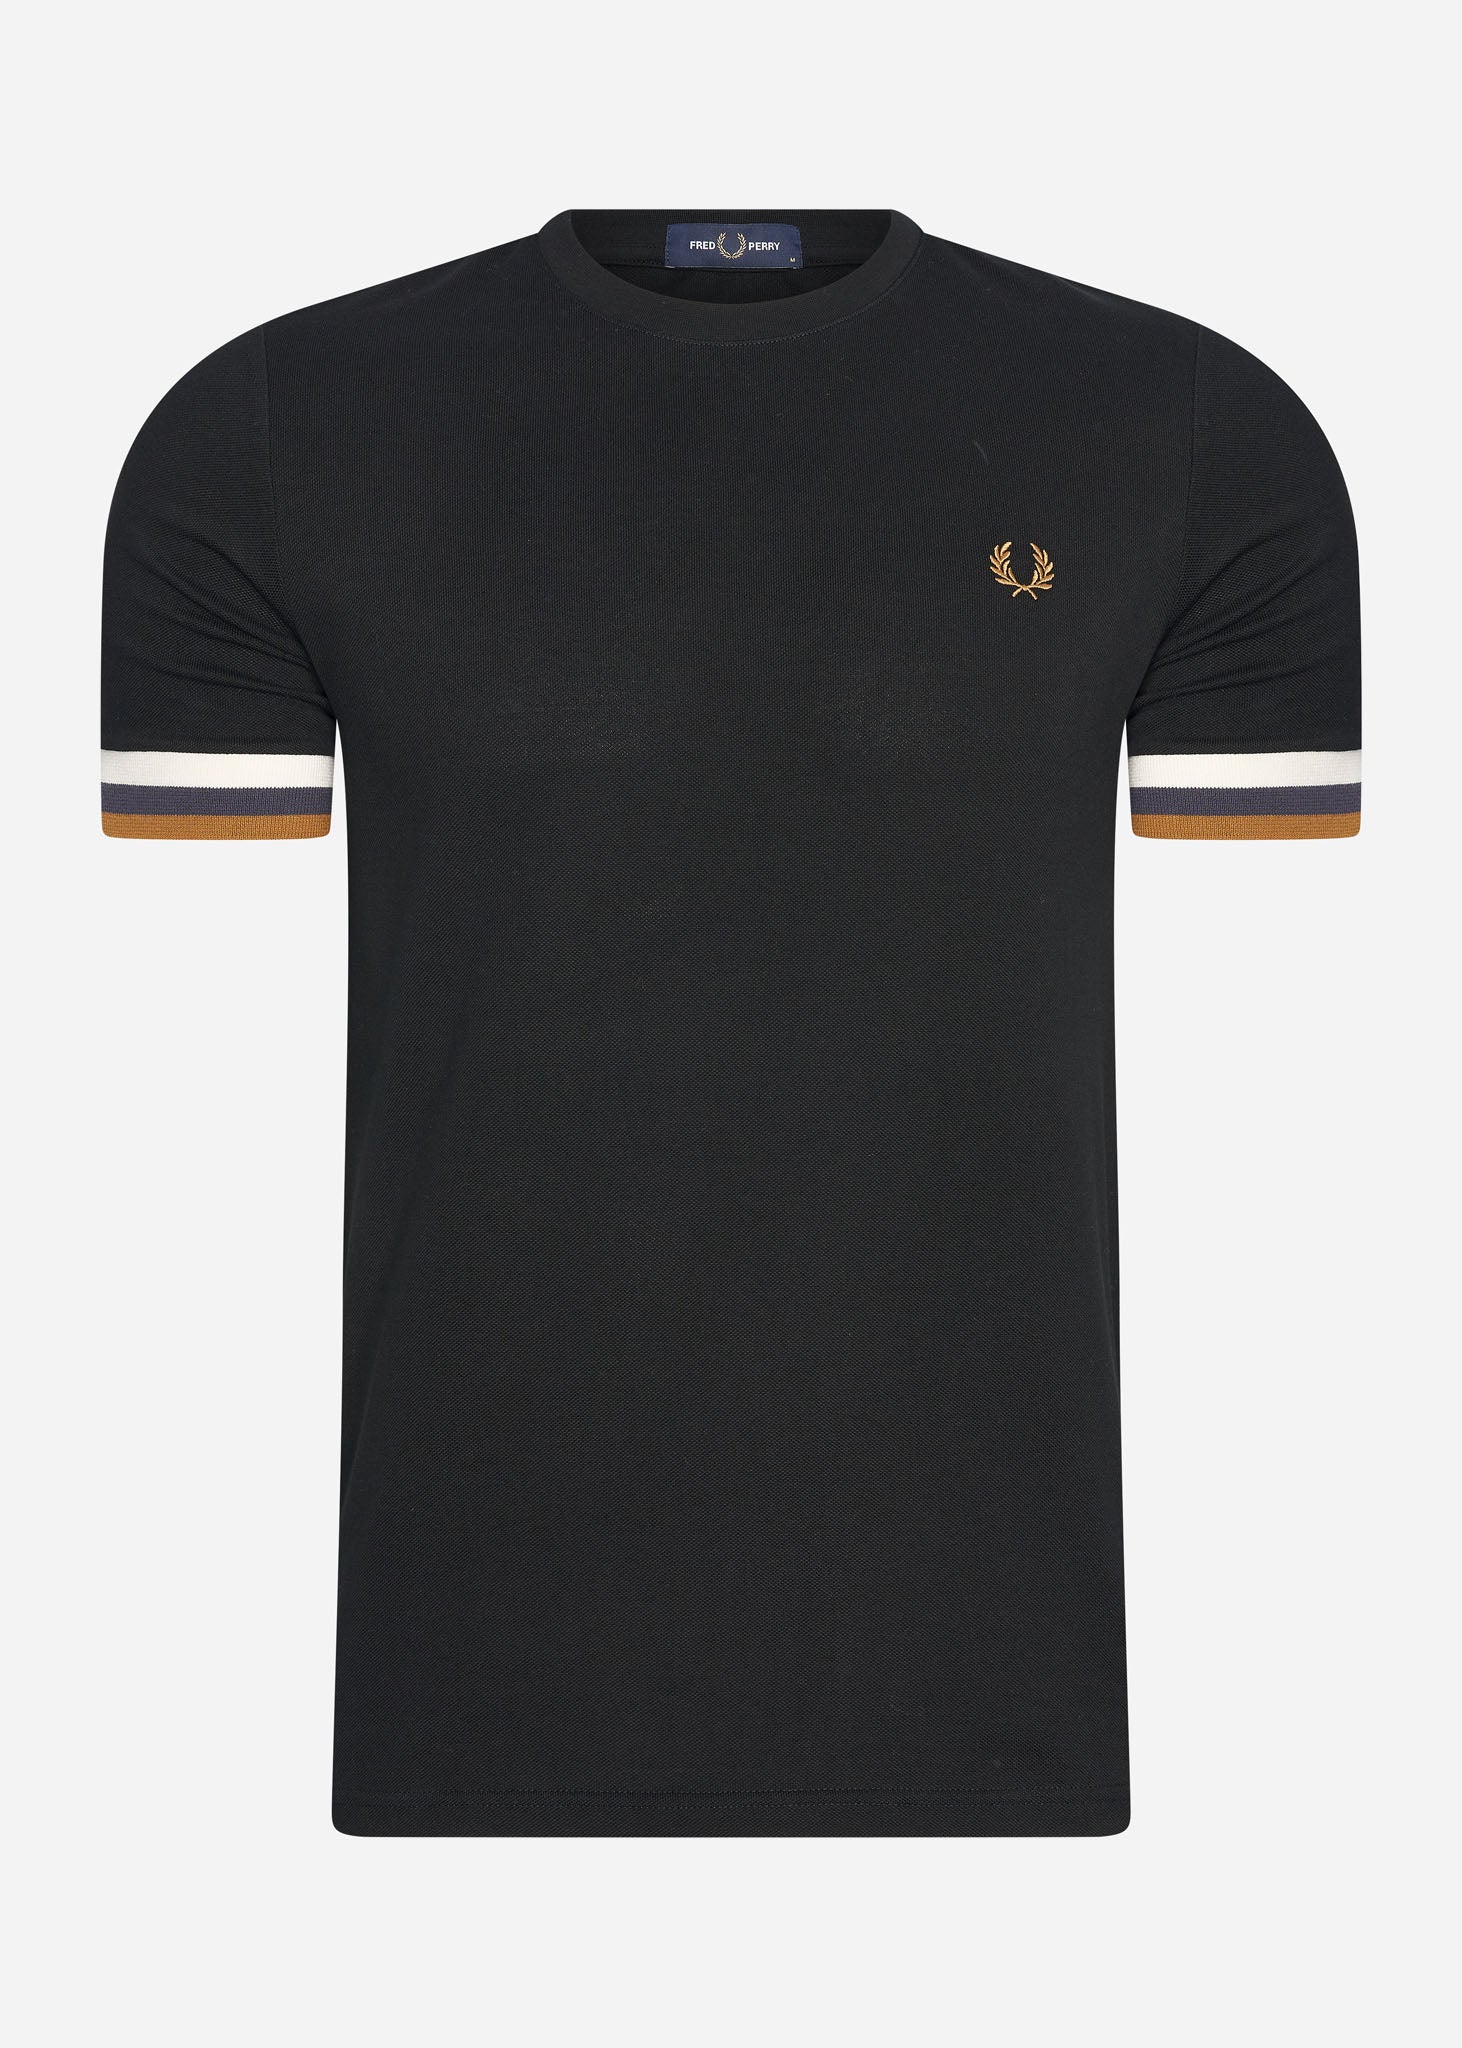 fred perry pique t-shirt black